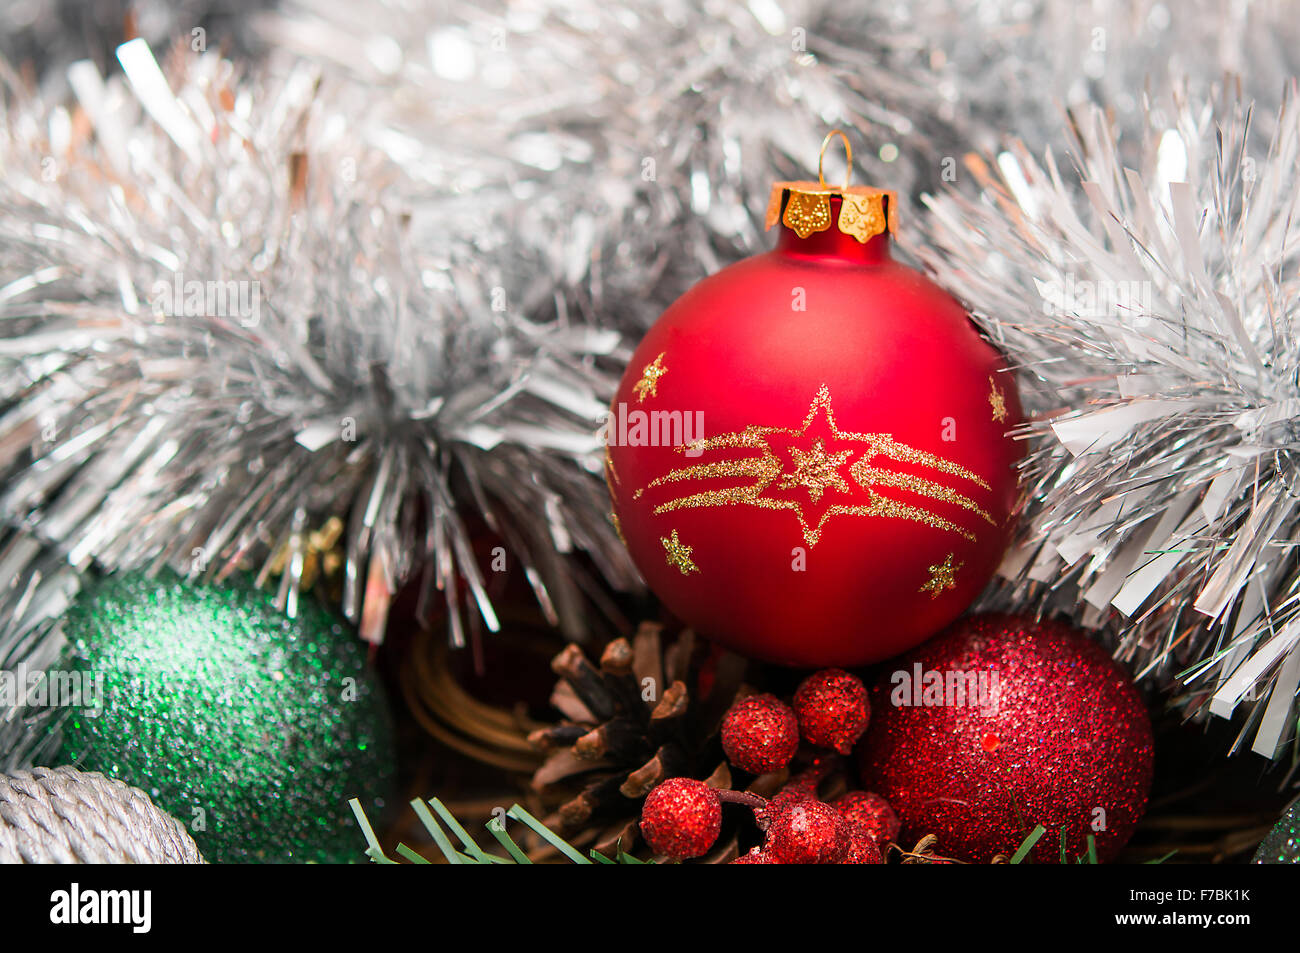 New Year composition with red ball and tinsel Stock Photo